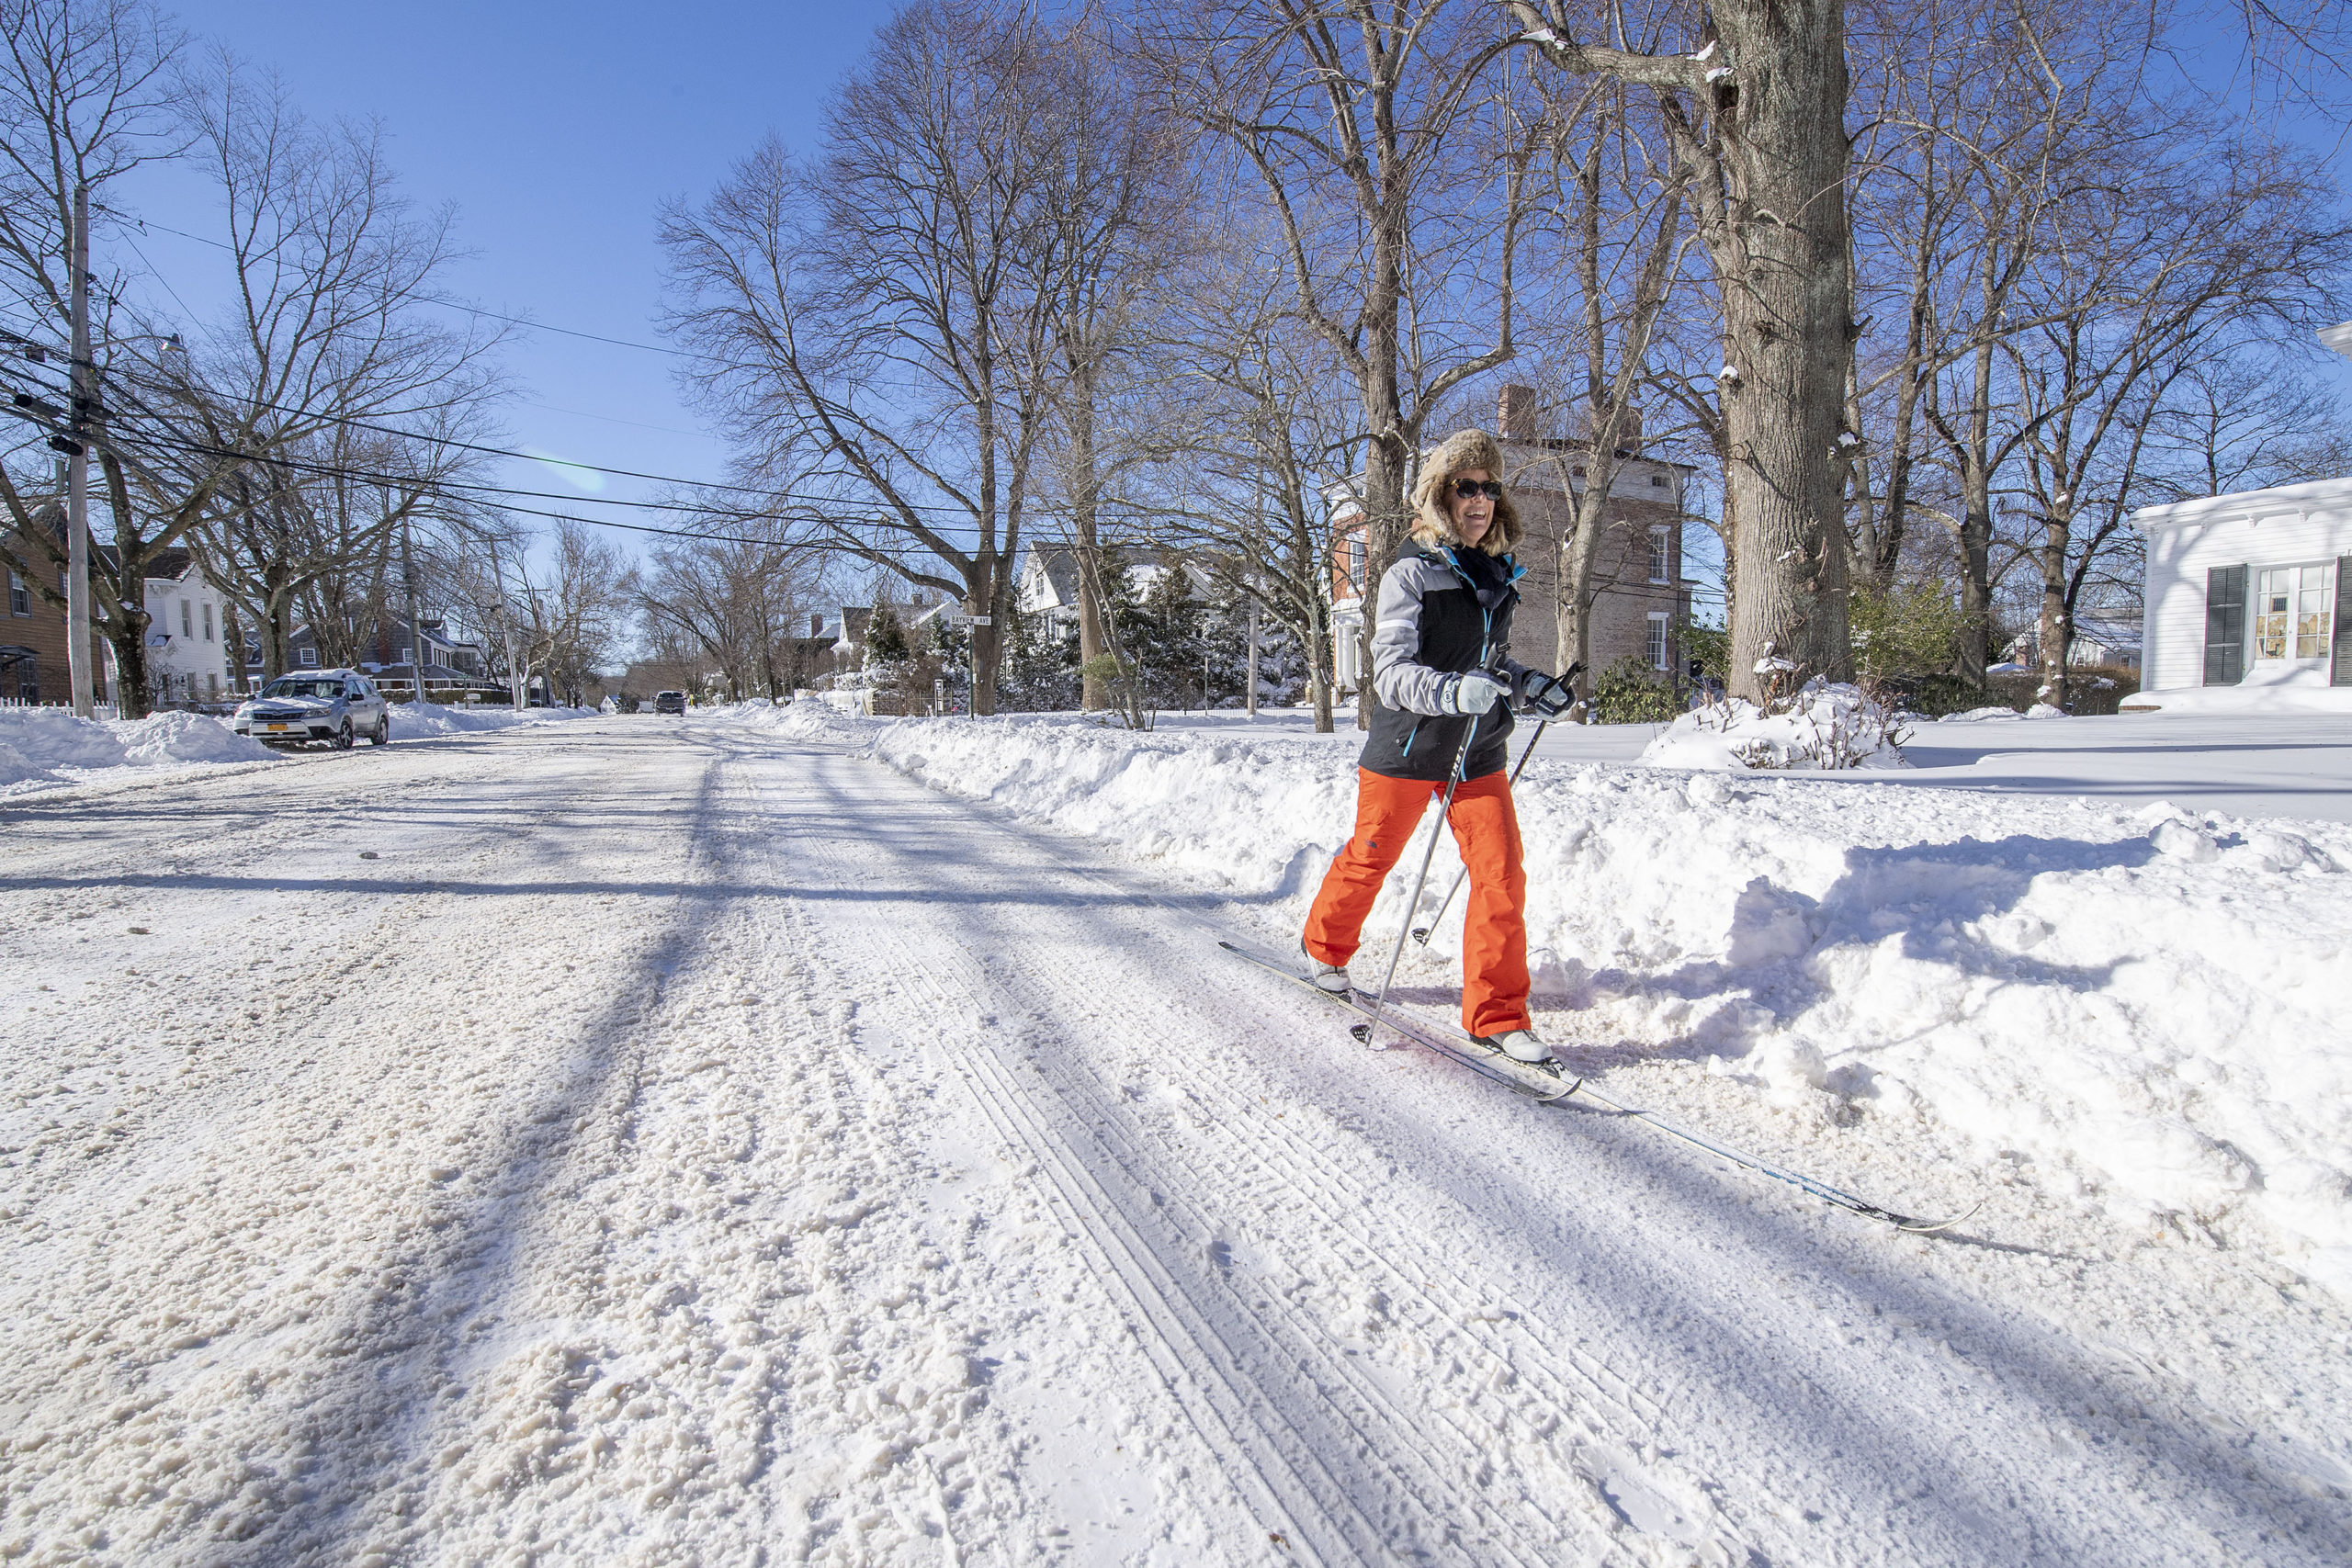 Laura Grenning skis down Main Street in Sag Harbor following the January Blizzard of '22 on Sunday morning.   MICHAEL HELLER